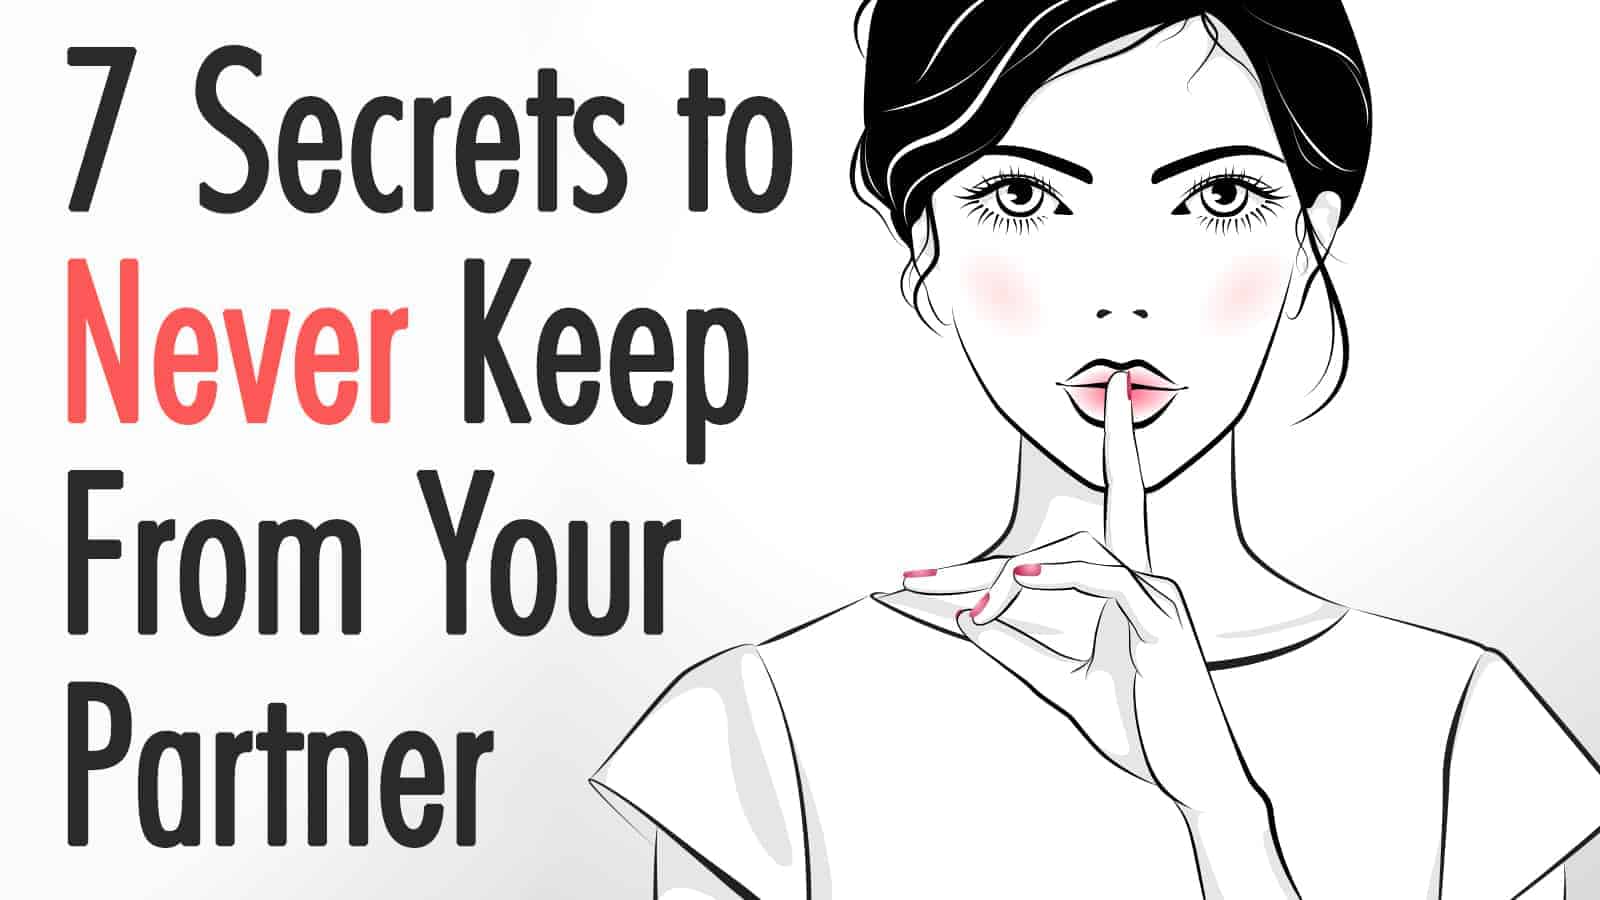 7 Secrets to Never Keep From Your Partner